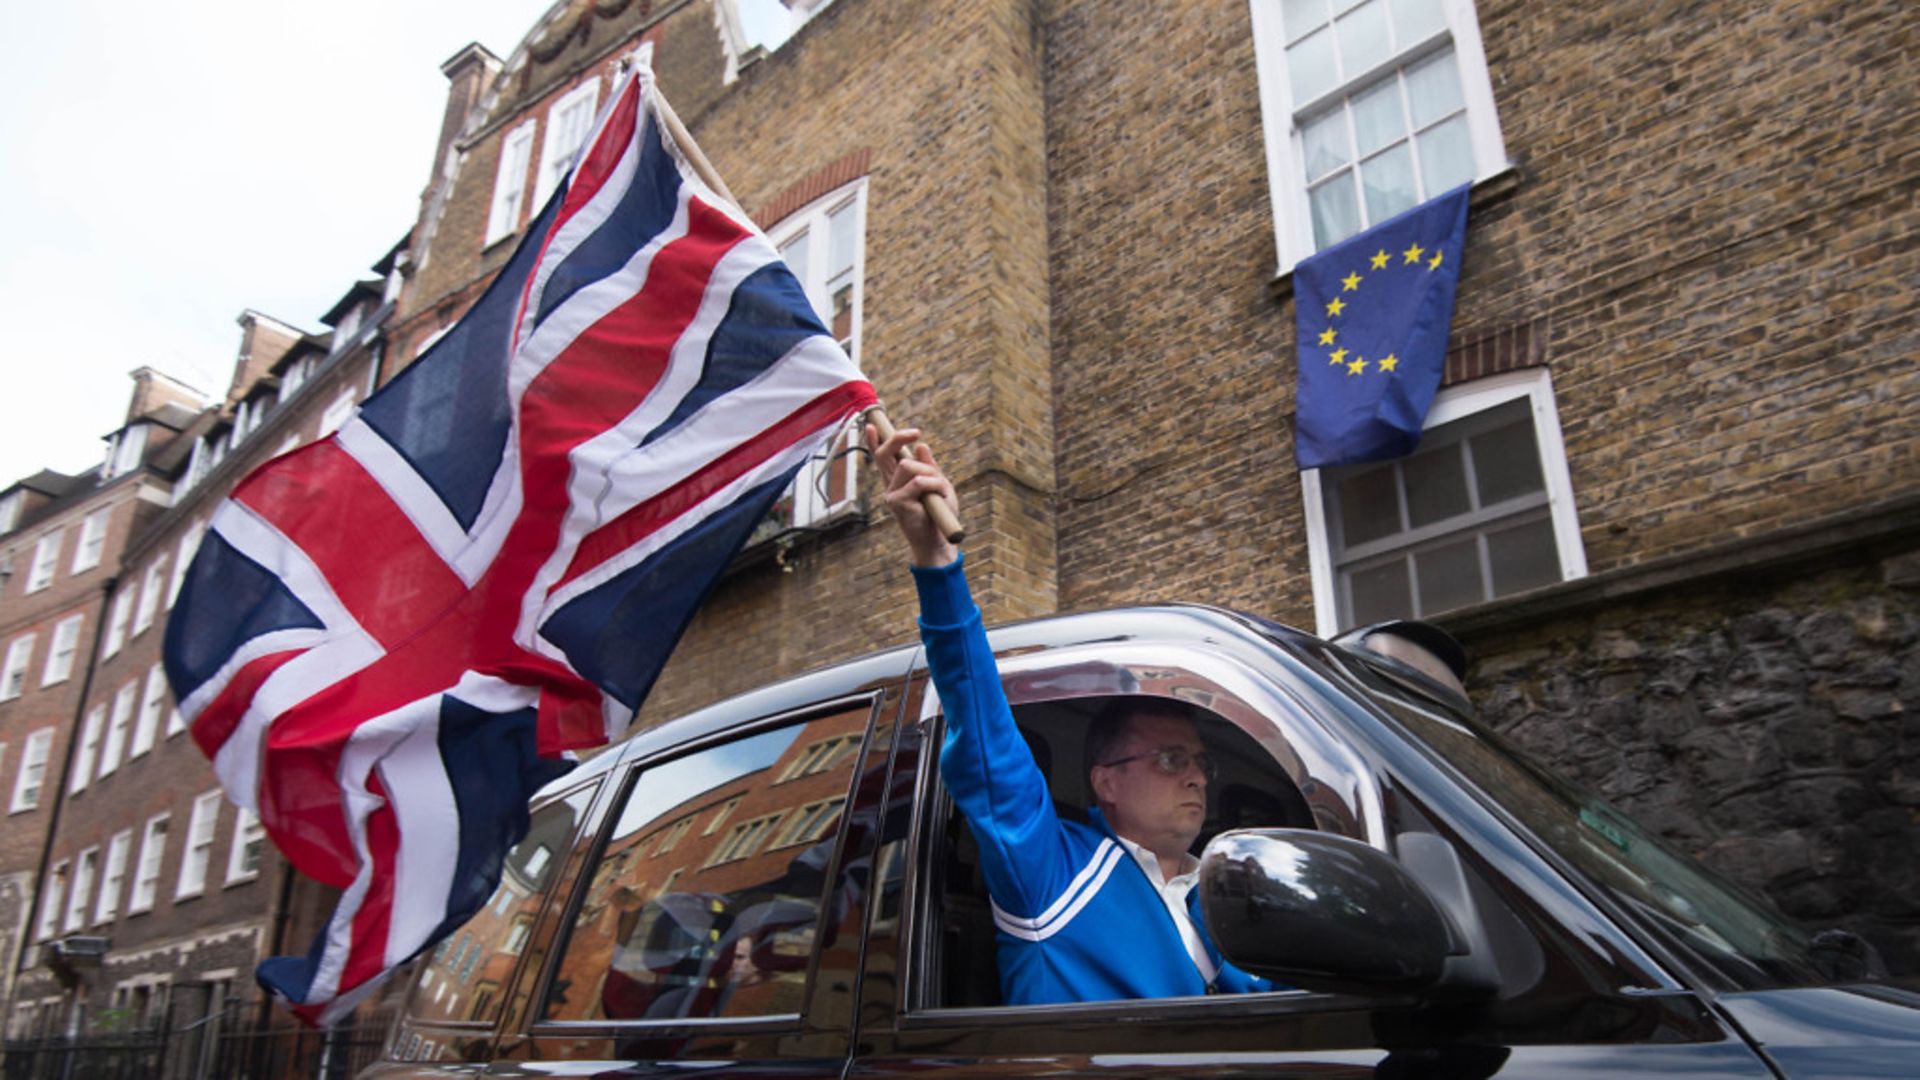 A London taxi driver waves a Union Jack flag in Westminster after the Brexit vote - Credit: PA